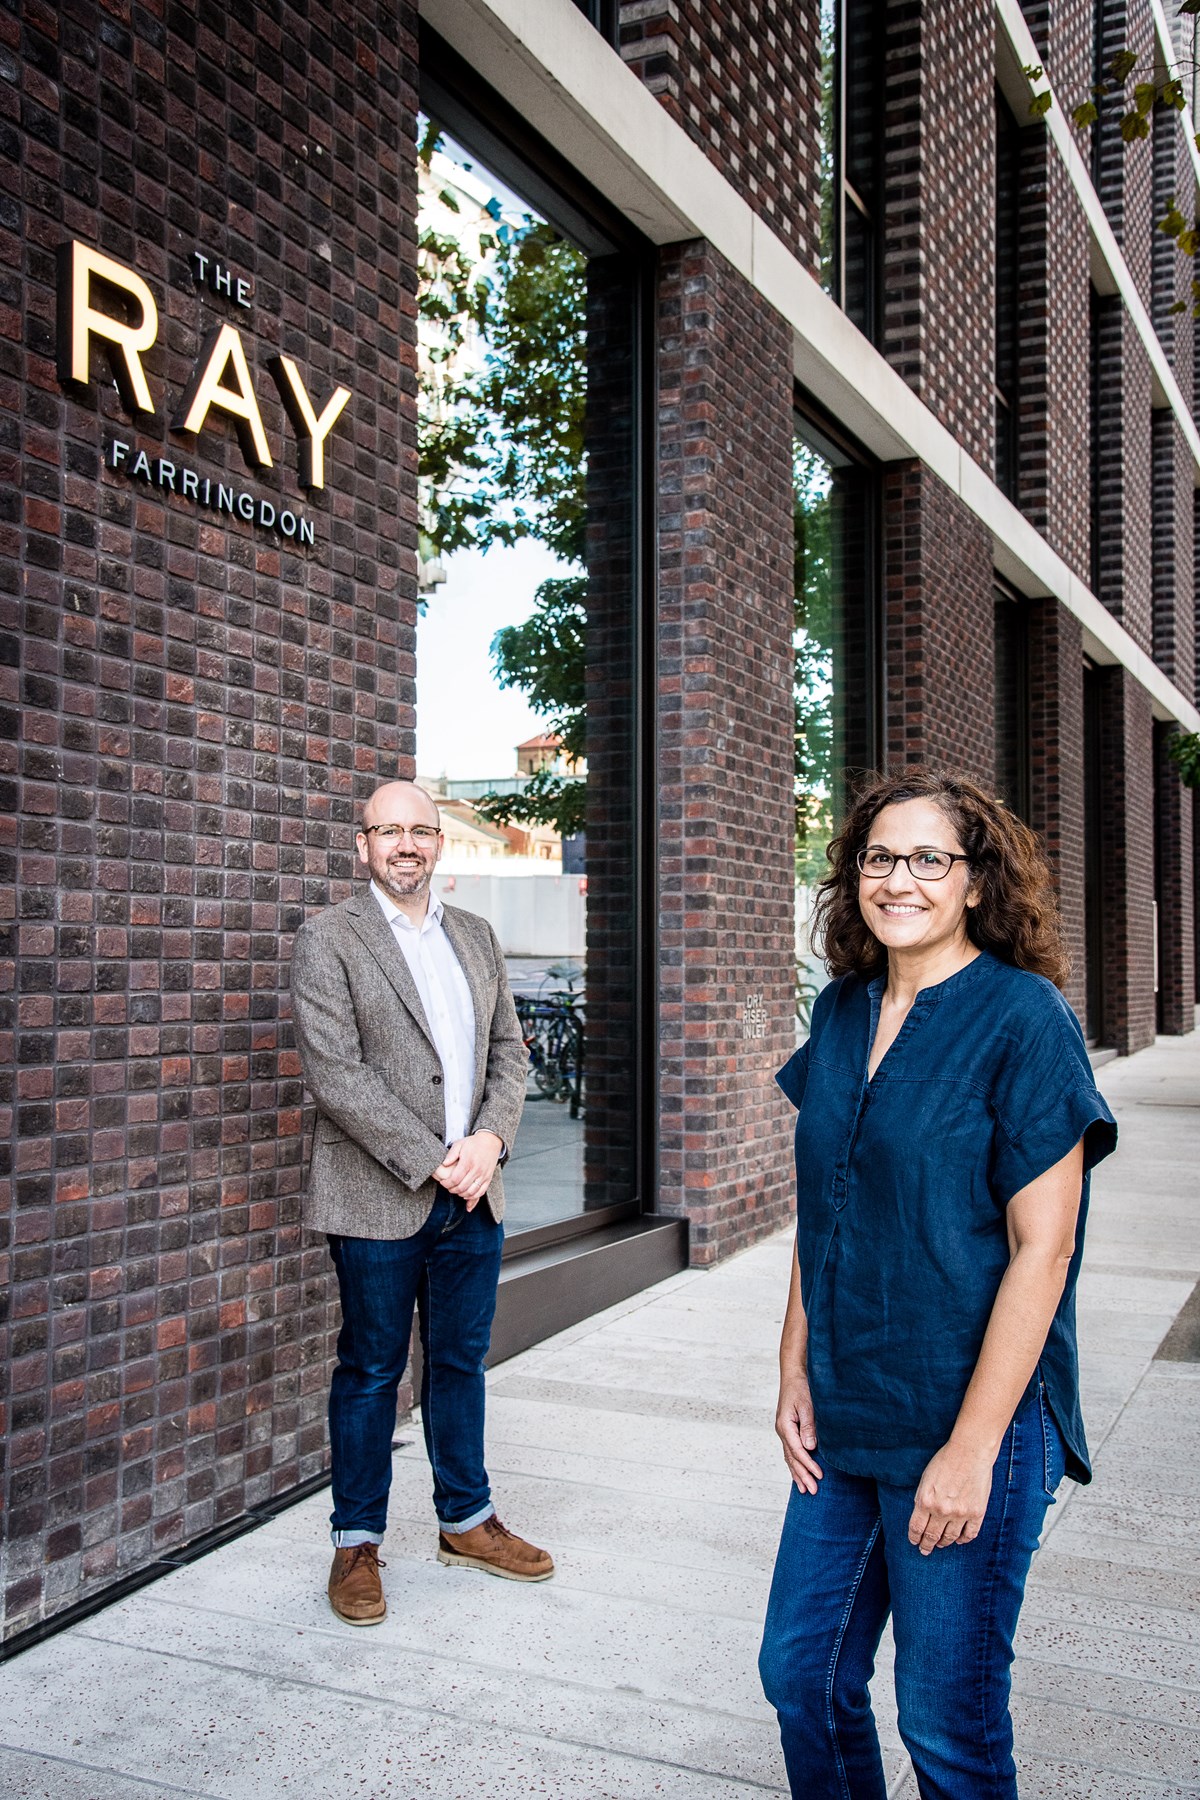 Cllr Asima Shaikh and Alex Elkins outside The Ray Farringdon, home to Better Space, the affordable workspace for local entrepreneurs